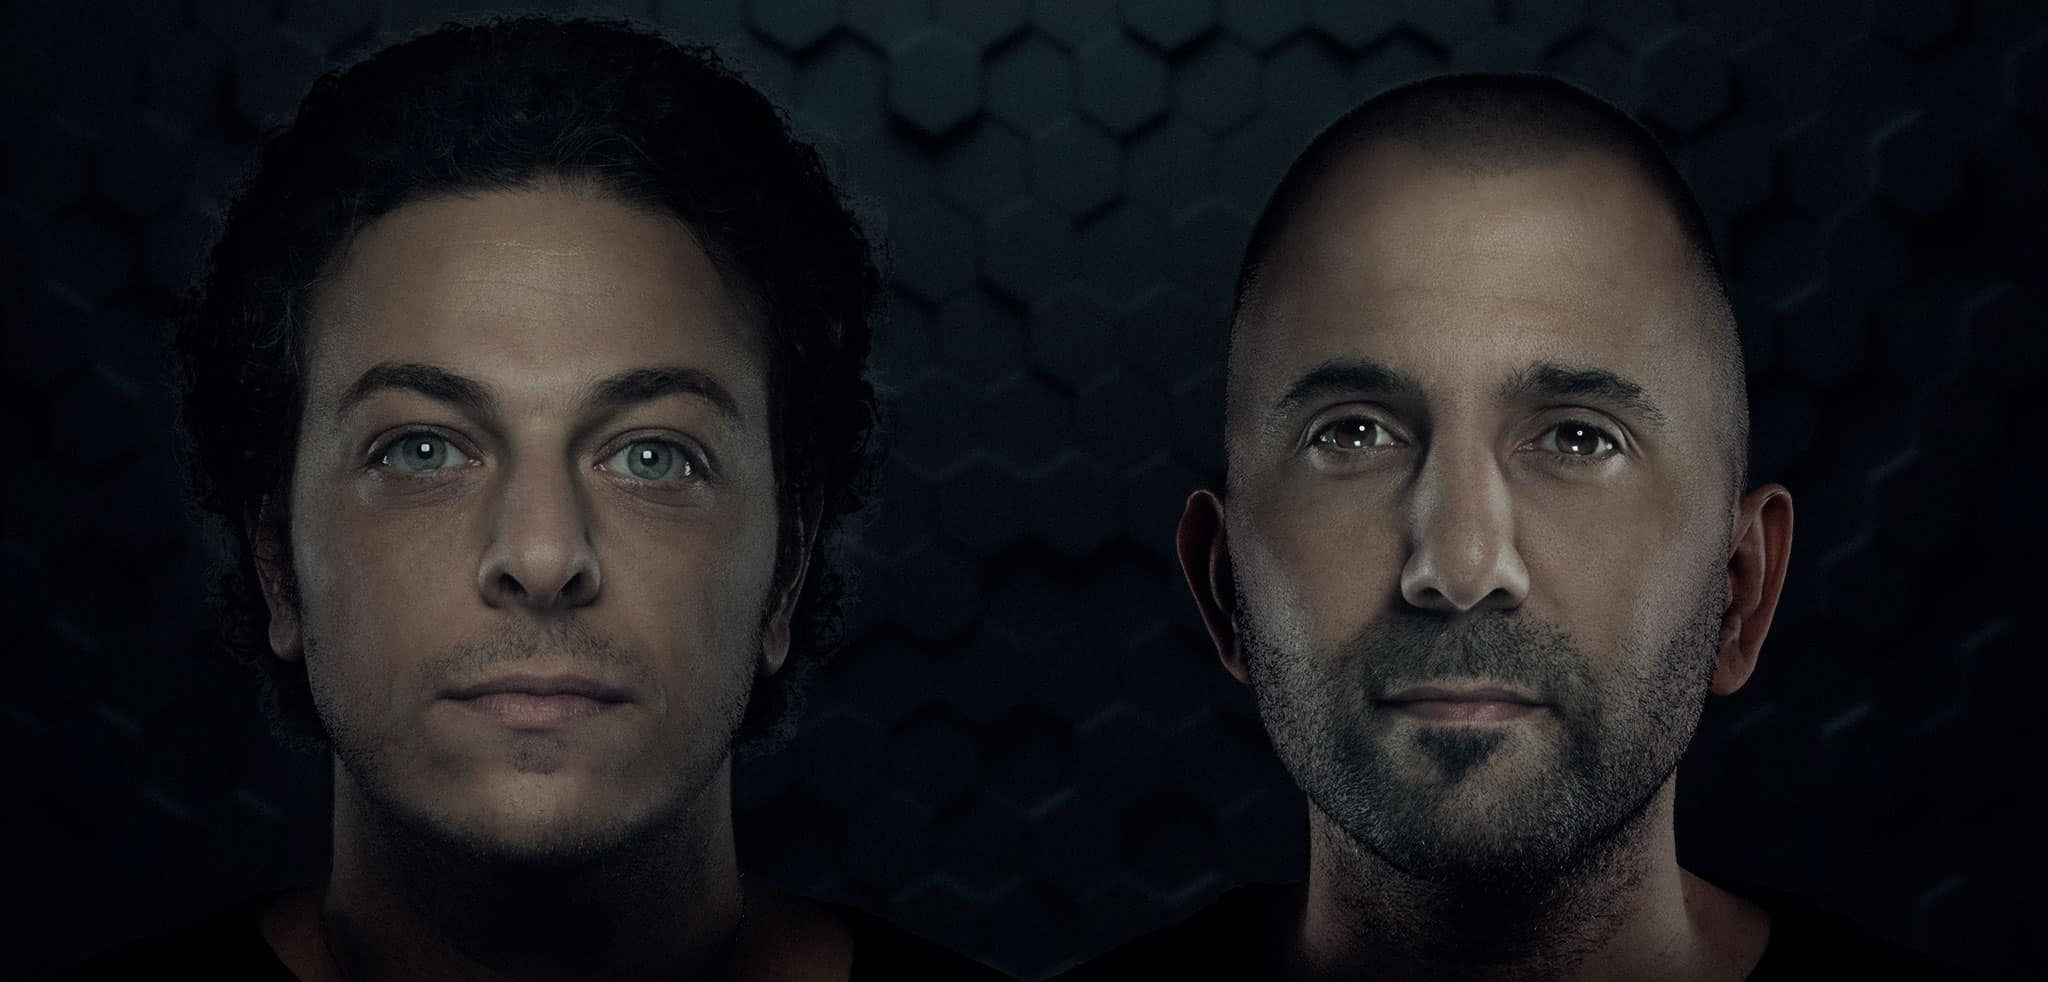 Vini Vici team up with Berg for psytrance remake of ‘Sweet Harmony’